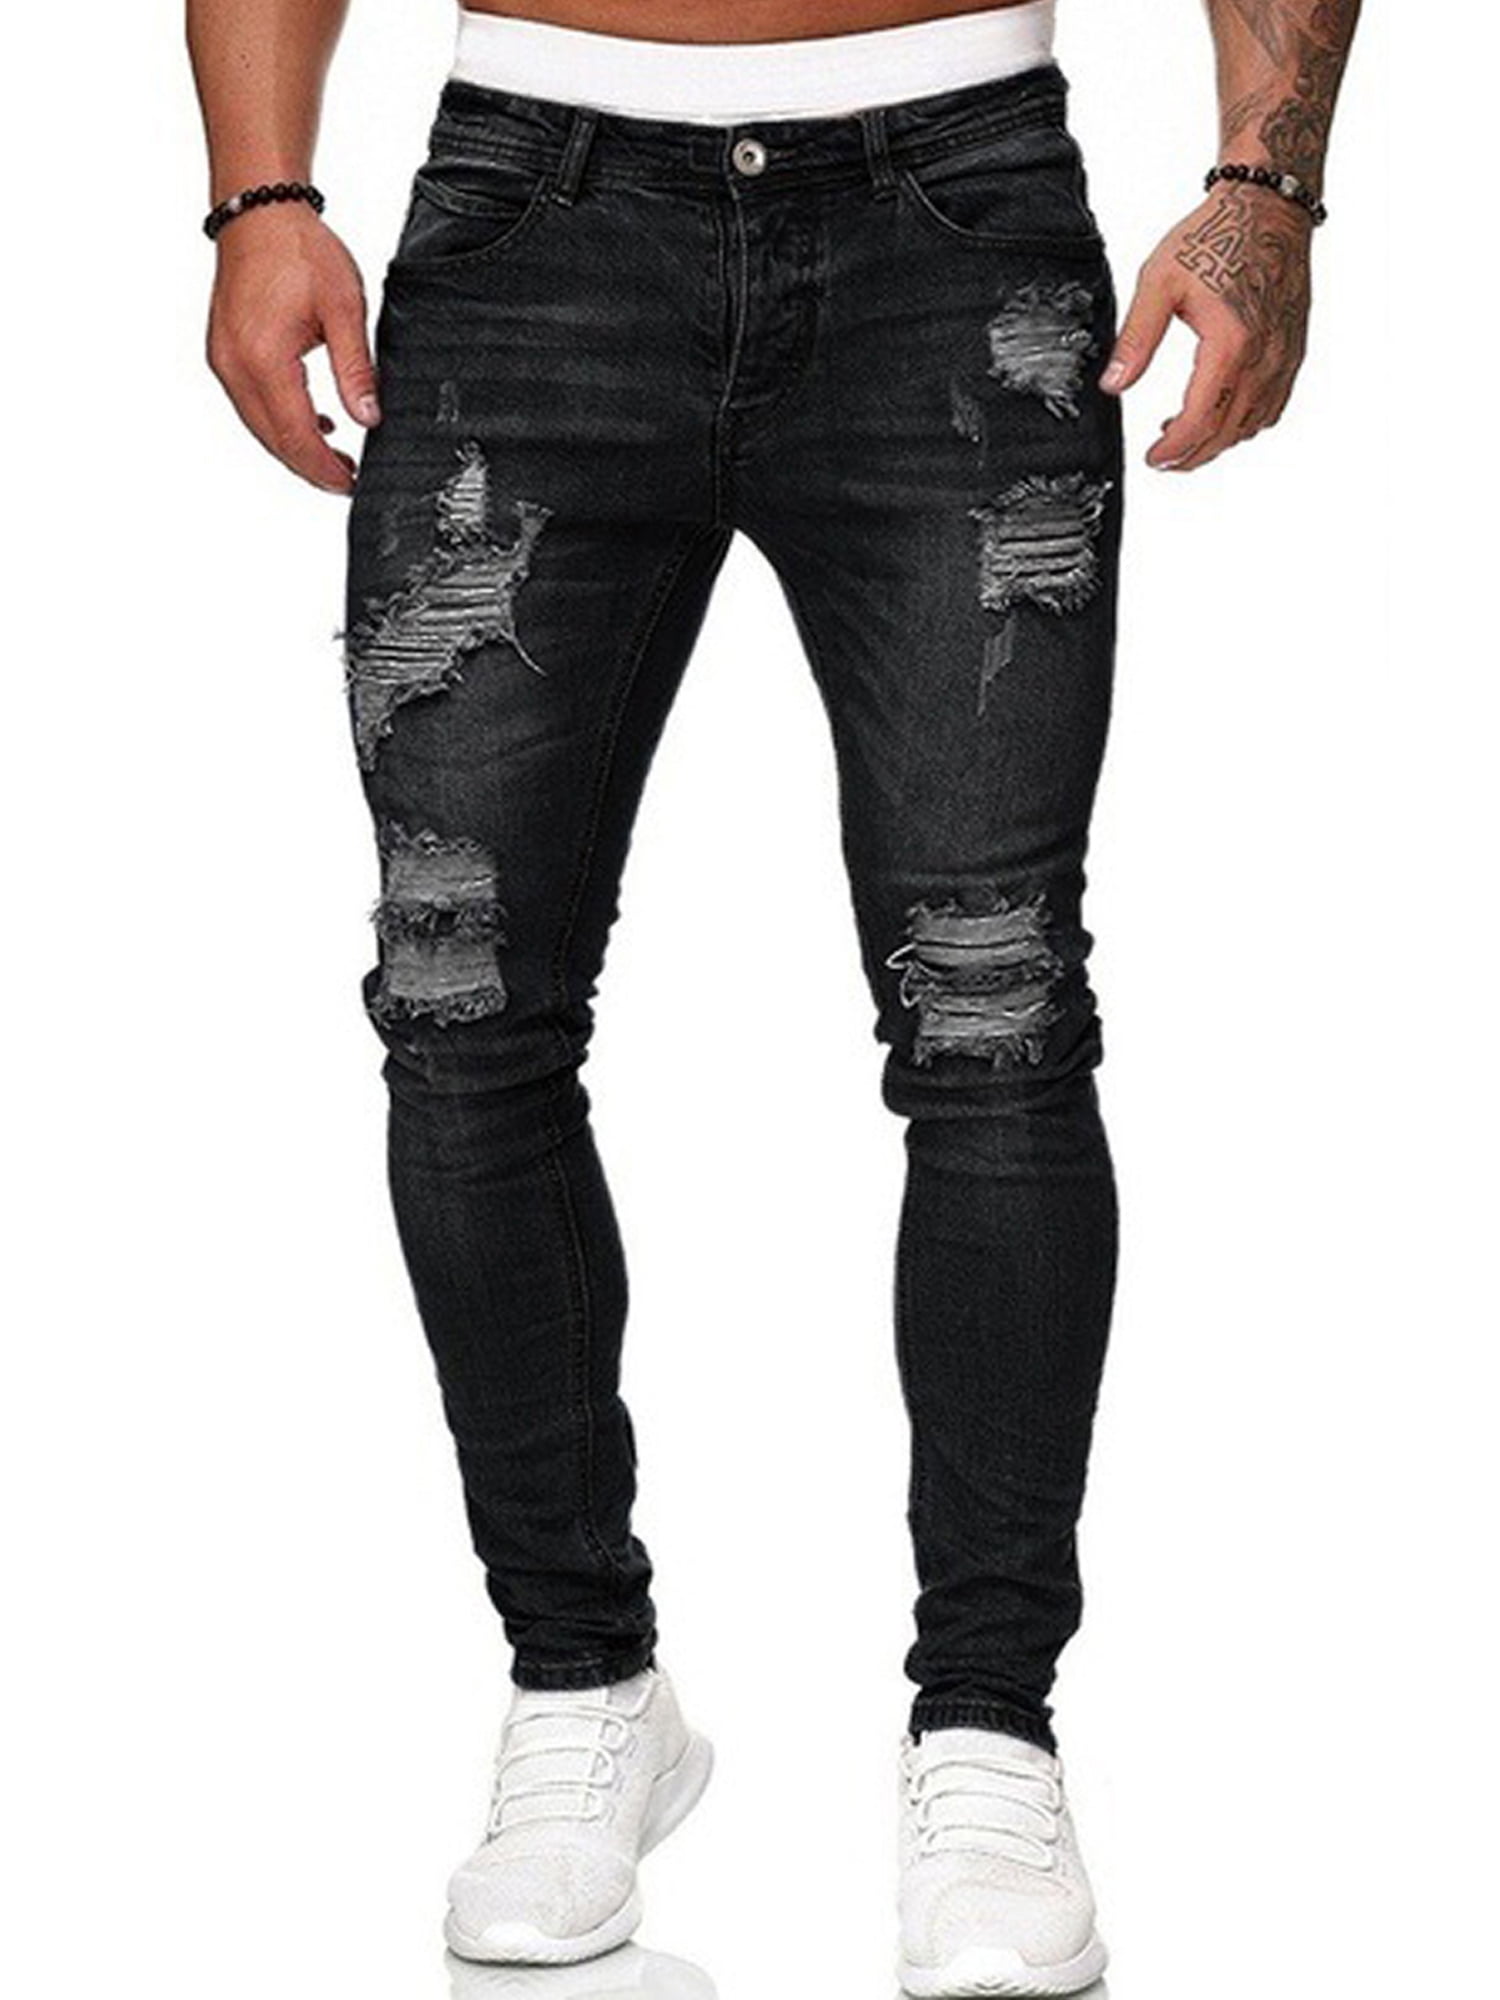 Blue Jeans for Men Relaxed Fit,Forthery Mens Blue Skinny Ripped Distressed Slim Fit Destroyed Stretch Moto Biker Jeans